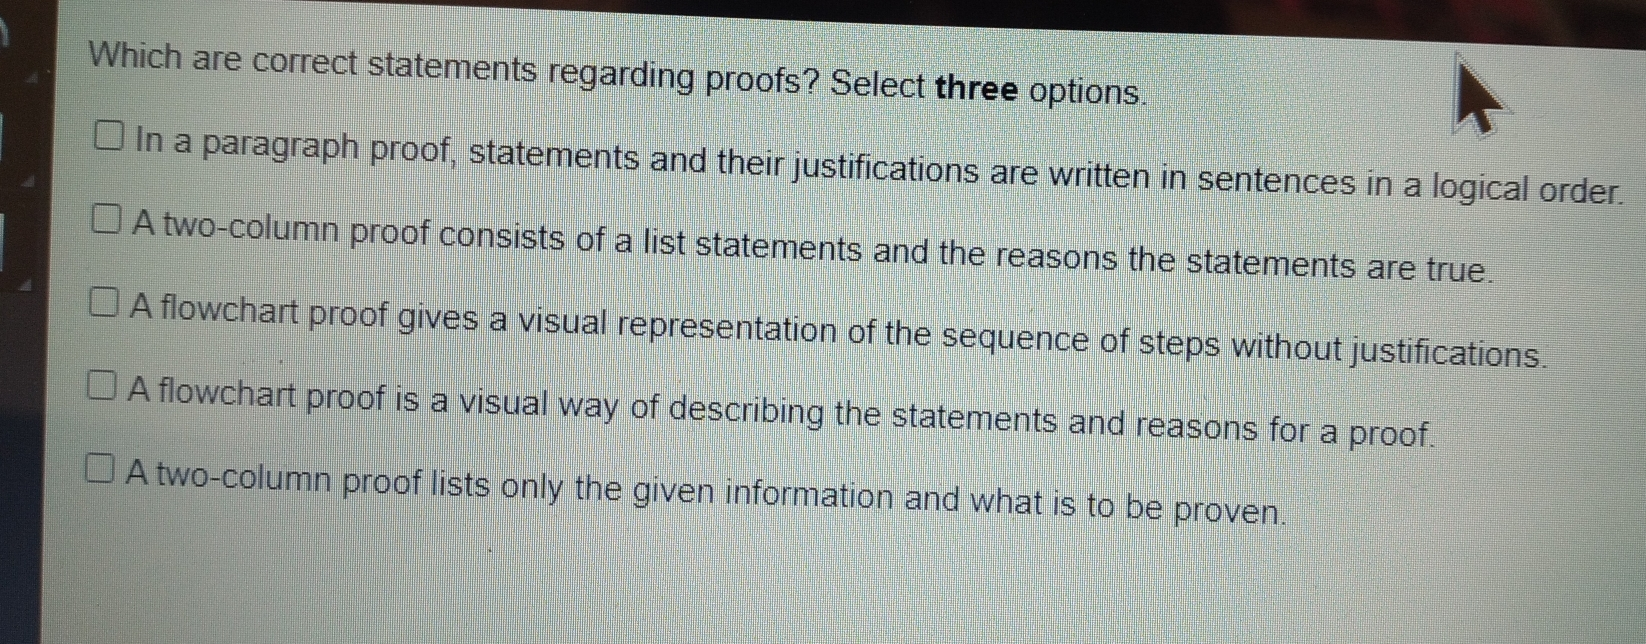 Which are correct statements regarding proofs? Select three options. In a paragraph proof, statements and their justifications are written in sentences in a logical order. A two-column proof consists of a list statements and the reasons the statements are true. A flowchart proof gives a visual representation of the sequence of steps without justifications A flowchart proof is a visual way of describing the statements and reasons for a proof. A two-column proof lists only the given information and what is to be proven